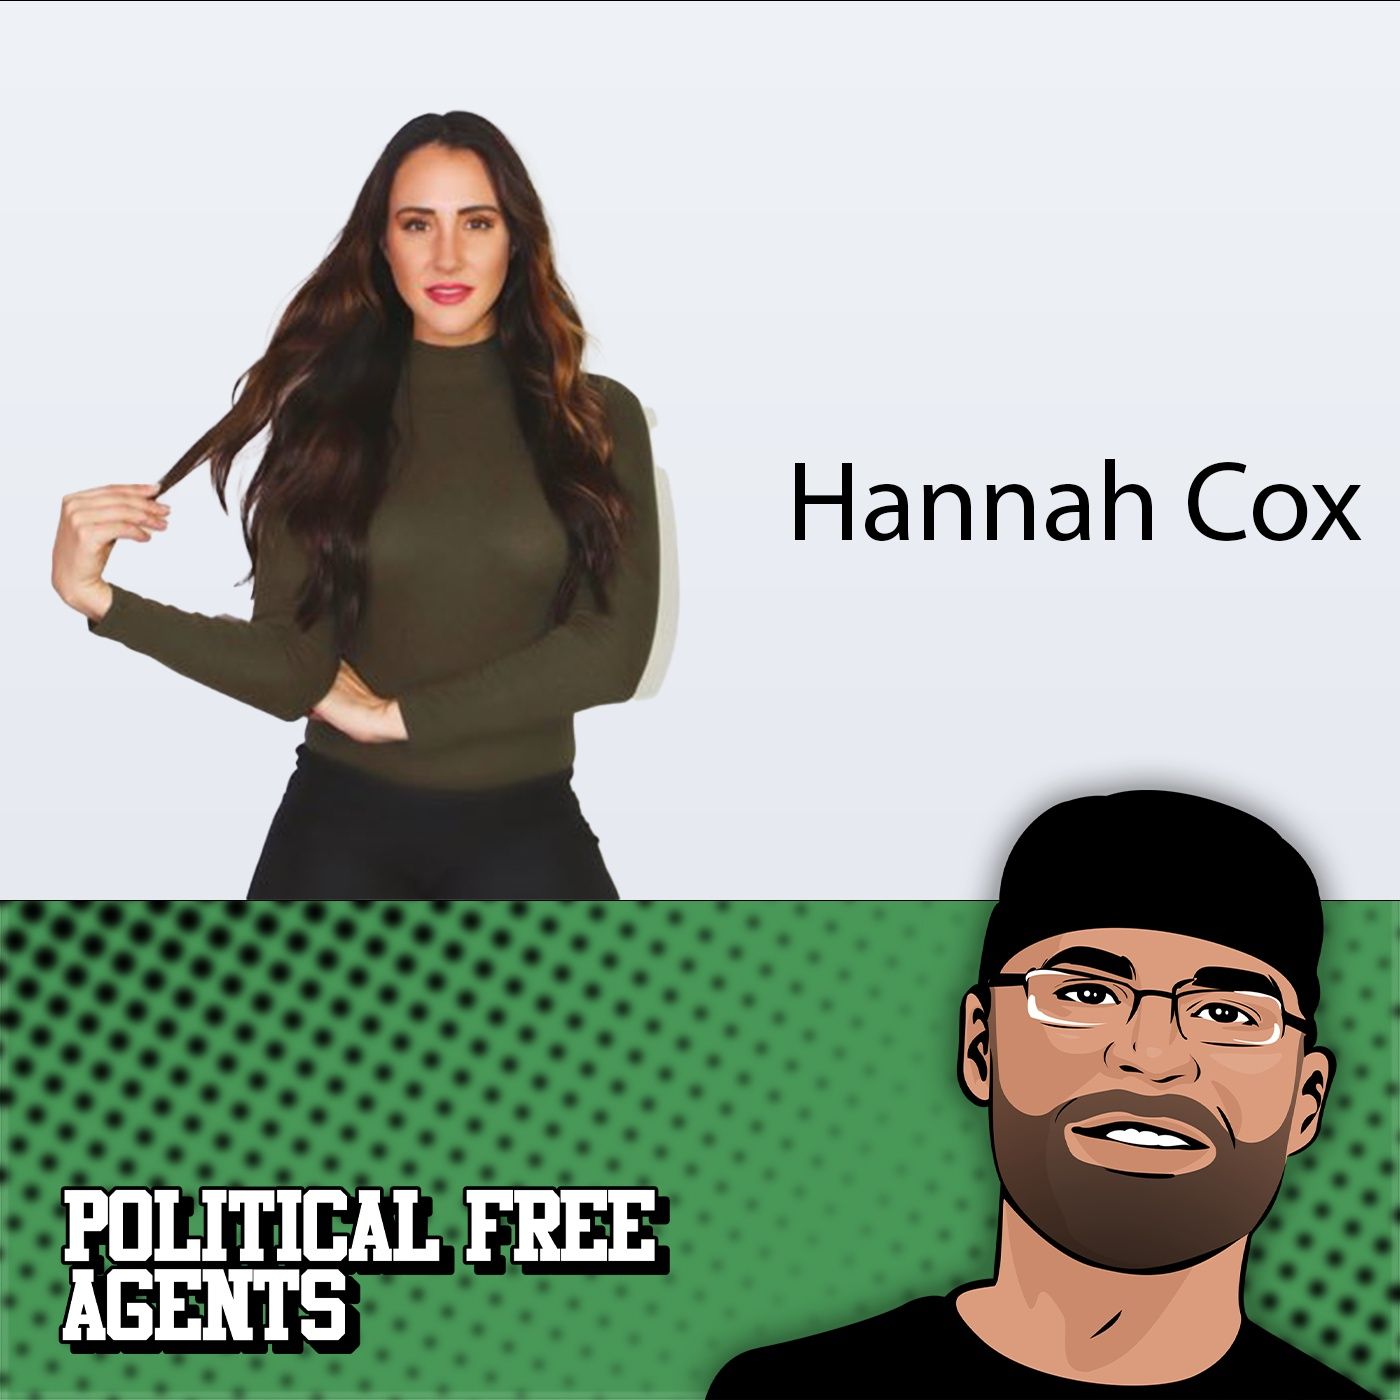 Episode 124: Hannah Cox Discusses Progress Without Government Intervention